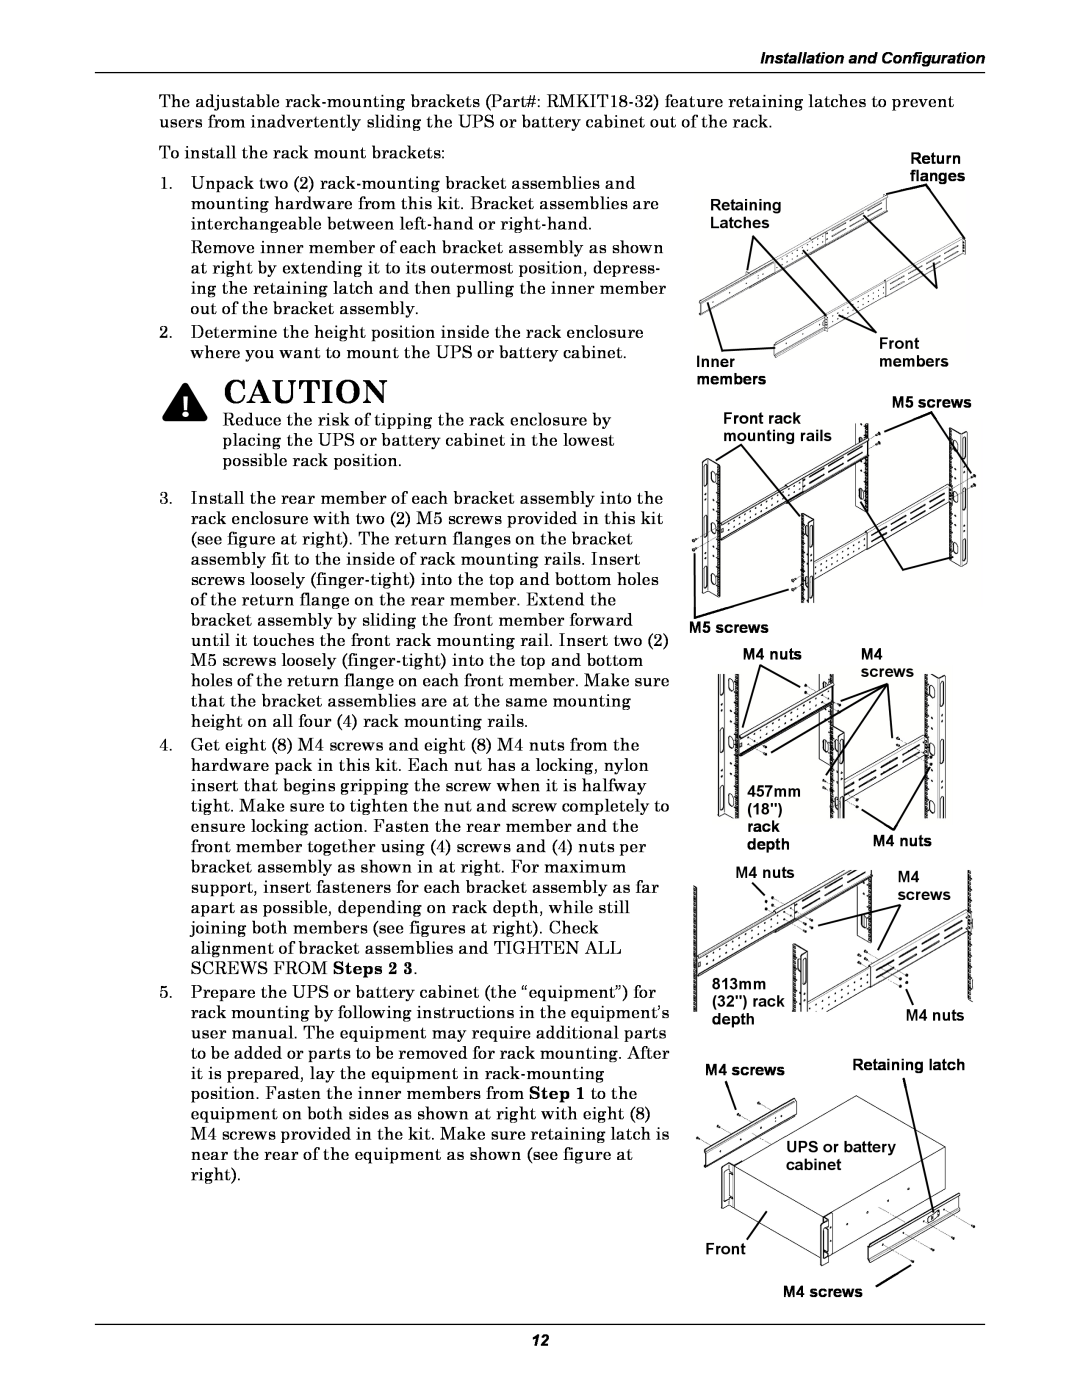 Emerson GXT3 230V user manual To install the rack mount brackets 